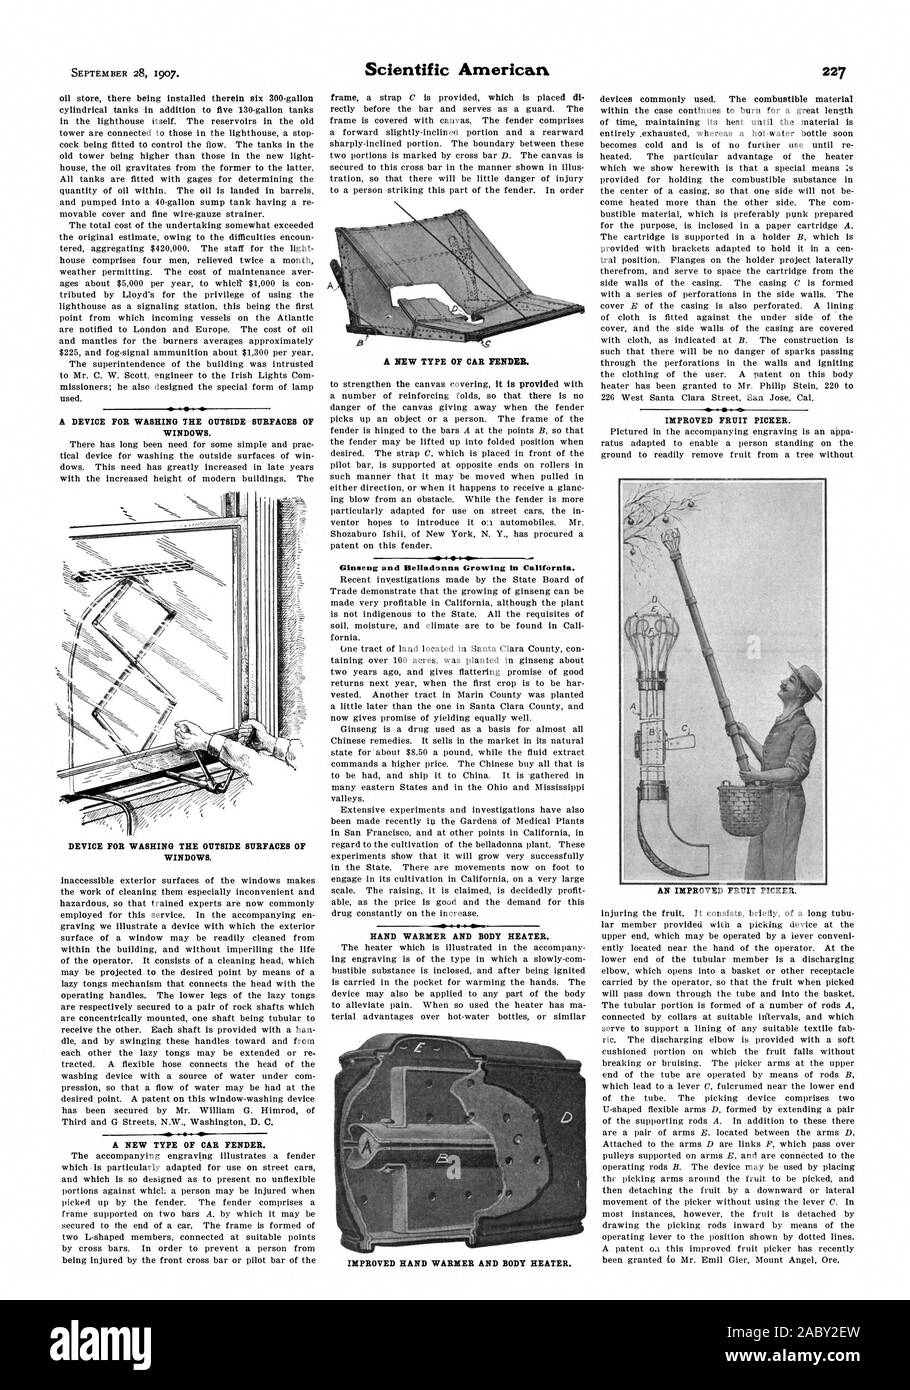 A DEVICE FOR WASHING THE OUTSIDE SURFACES OF WINDOWS. DEVICE FOR WASHING THE OUTSIDE SURFACES OF WINDOWS. A NEW TYPE OF CAR FENDER. V-4--0-41% Ginseng and Belladonna Growing in California. HAND WARMER AND BODY HEATER. IMPROVED HAND WARMER AND BODY HEATER. IMPROVED FRUIT PICKER. AN IMPROVED FRUIT PICKER., scientific american, 1907-09-28 Stock Photo